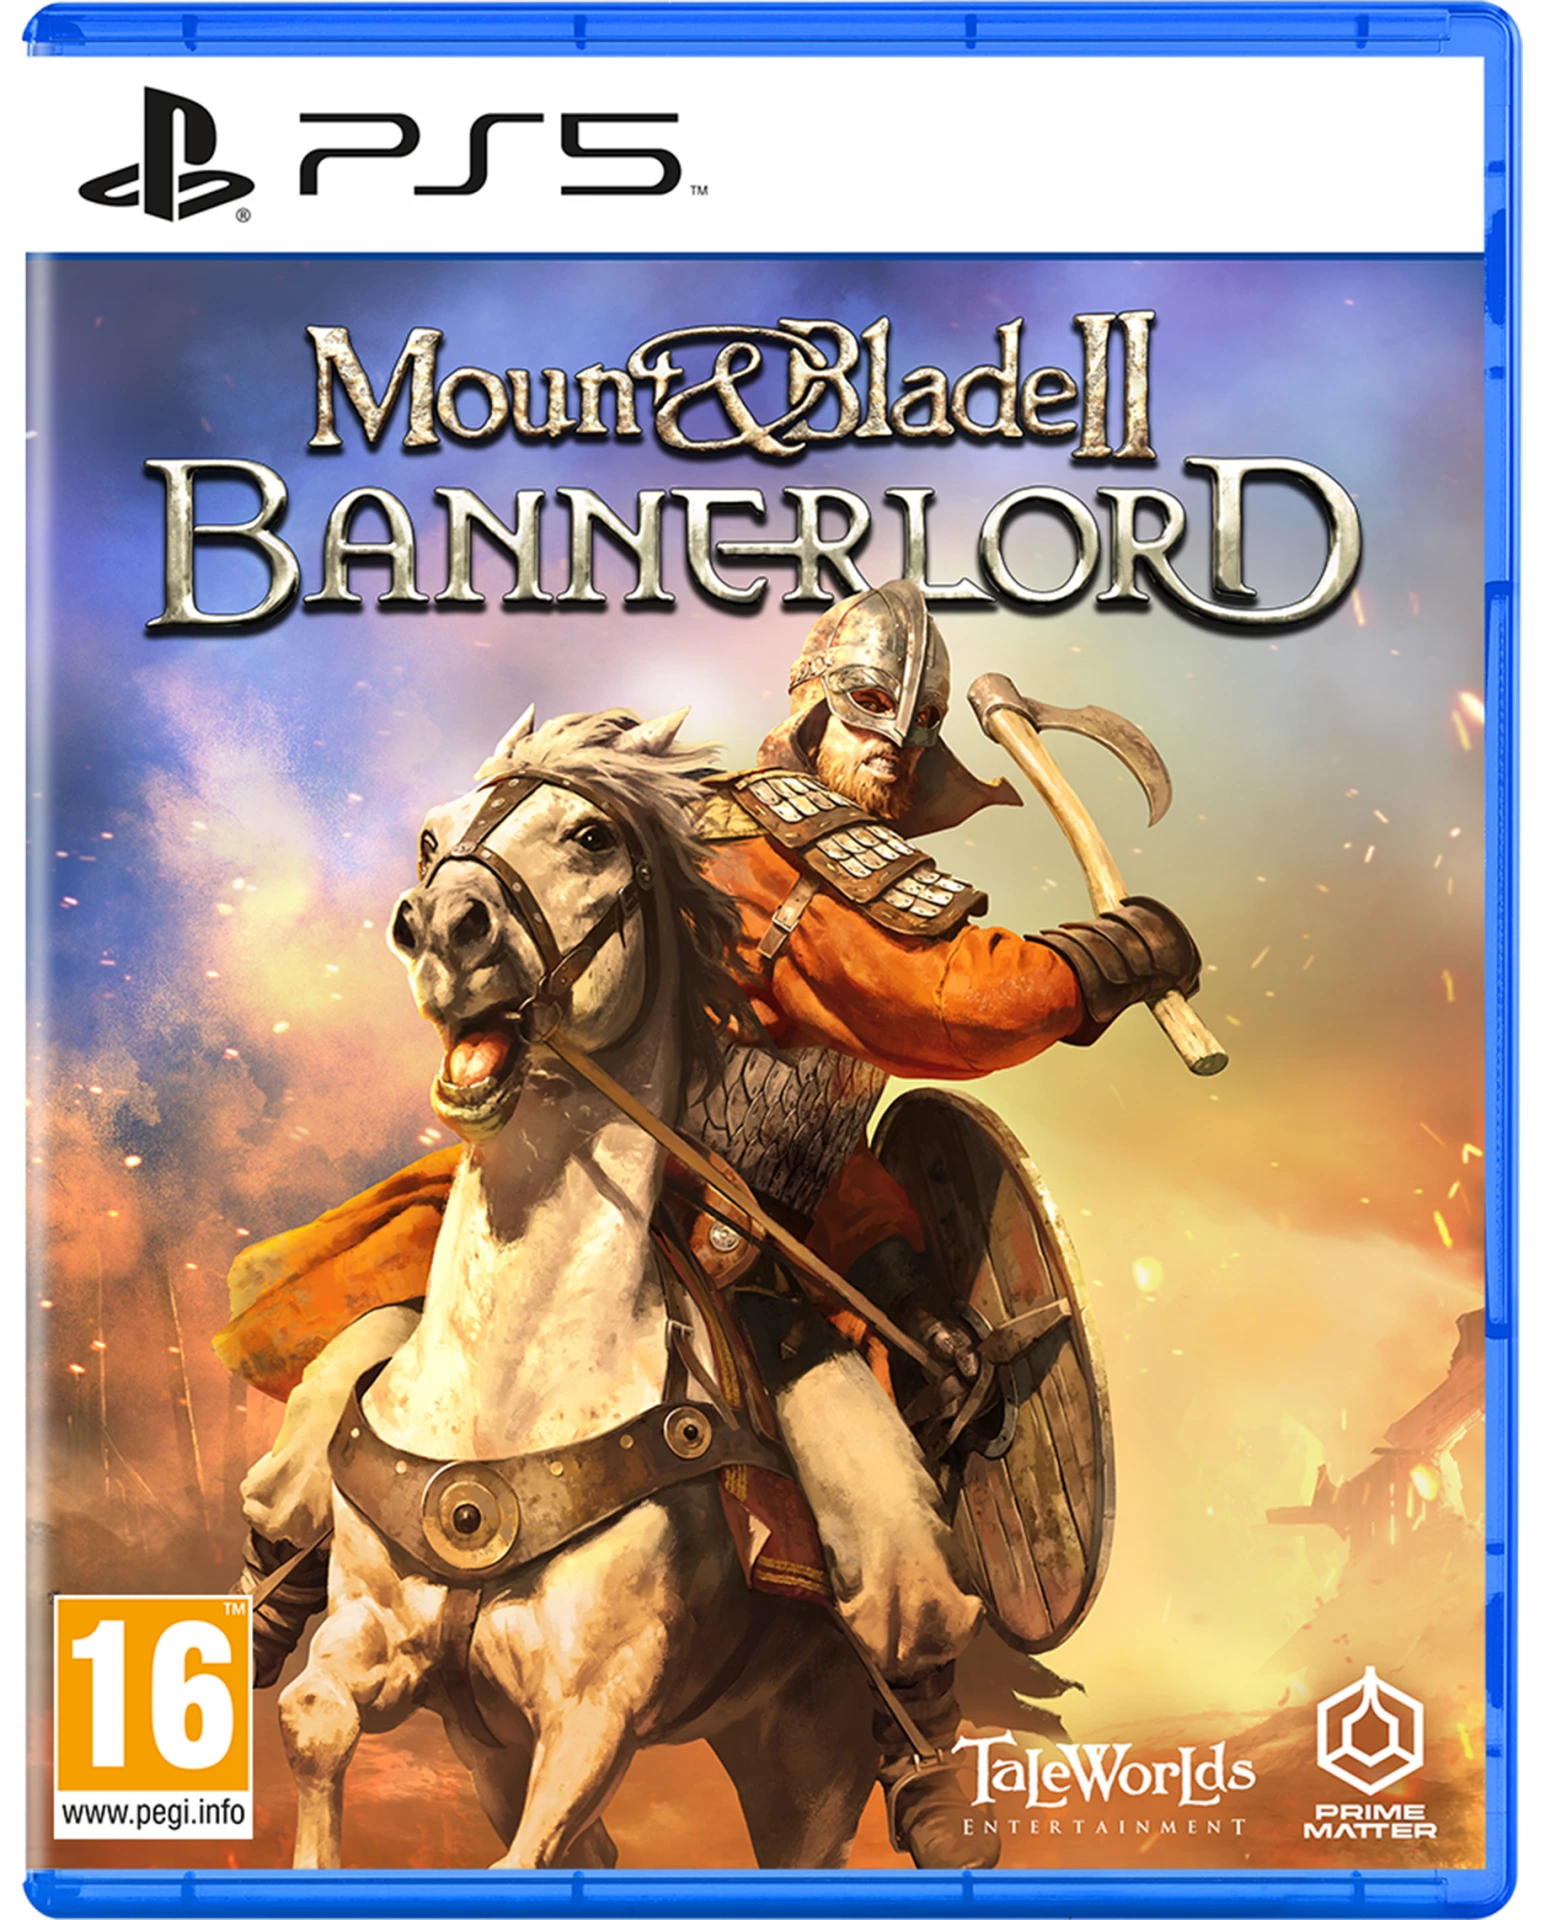 Mount & Blade 2: Bannerlord (PS5), Taleworlds Entertainment